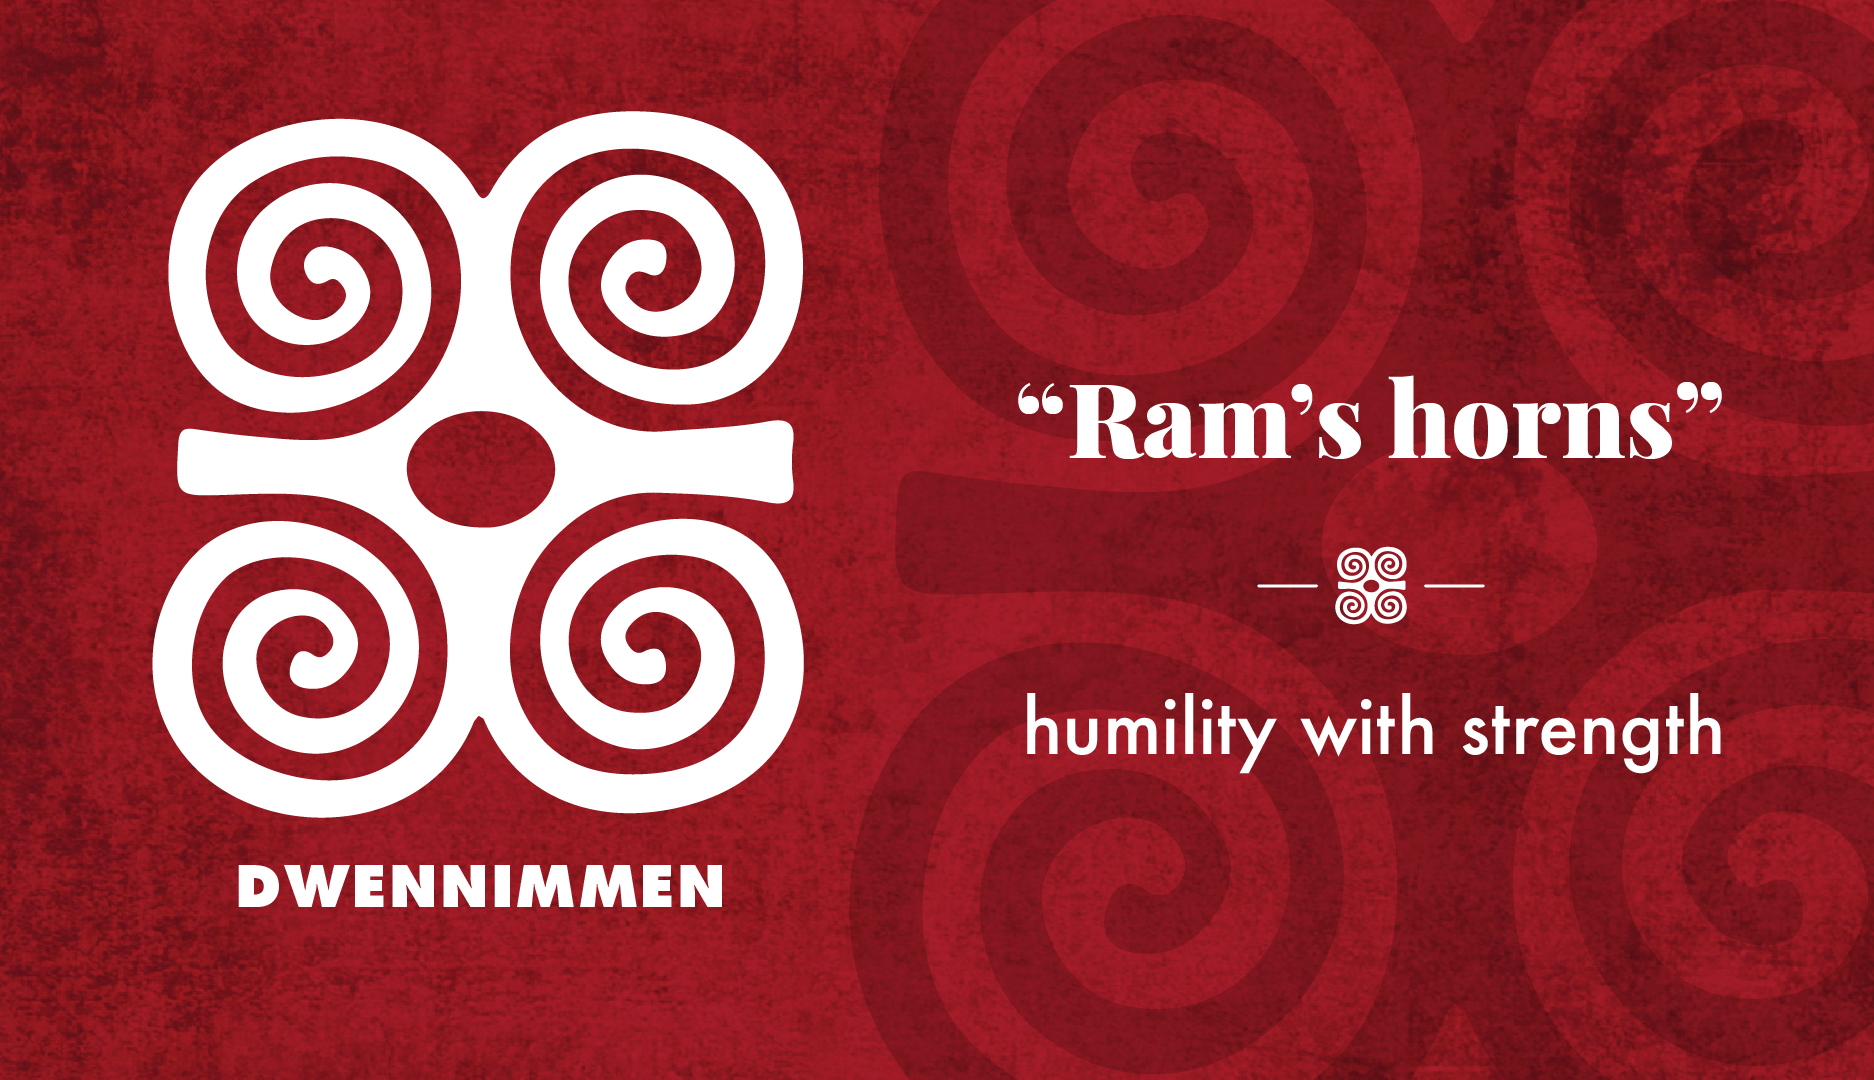 Adinkra symbol "DWENNIMMEN" meaning "Ram's Horns" humility with strength